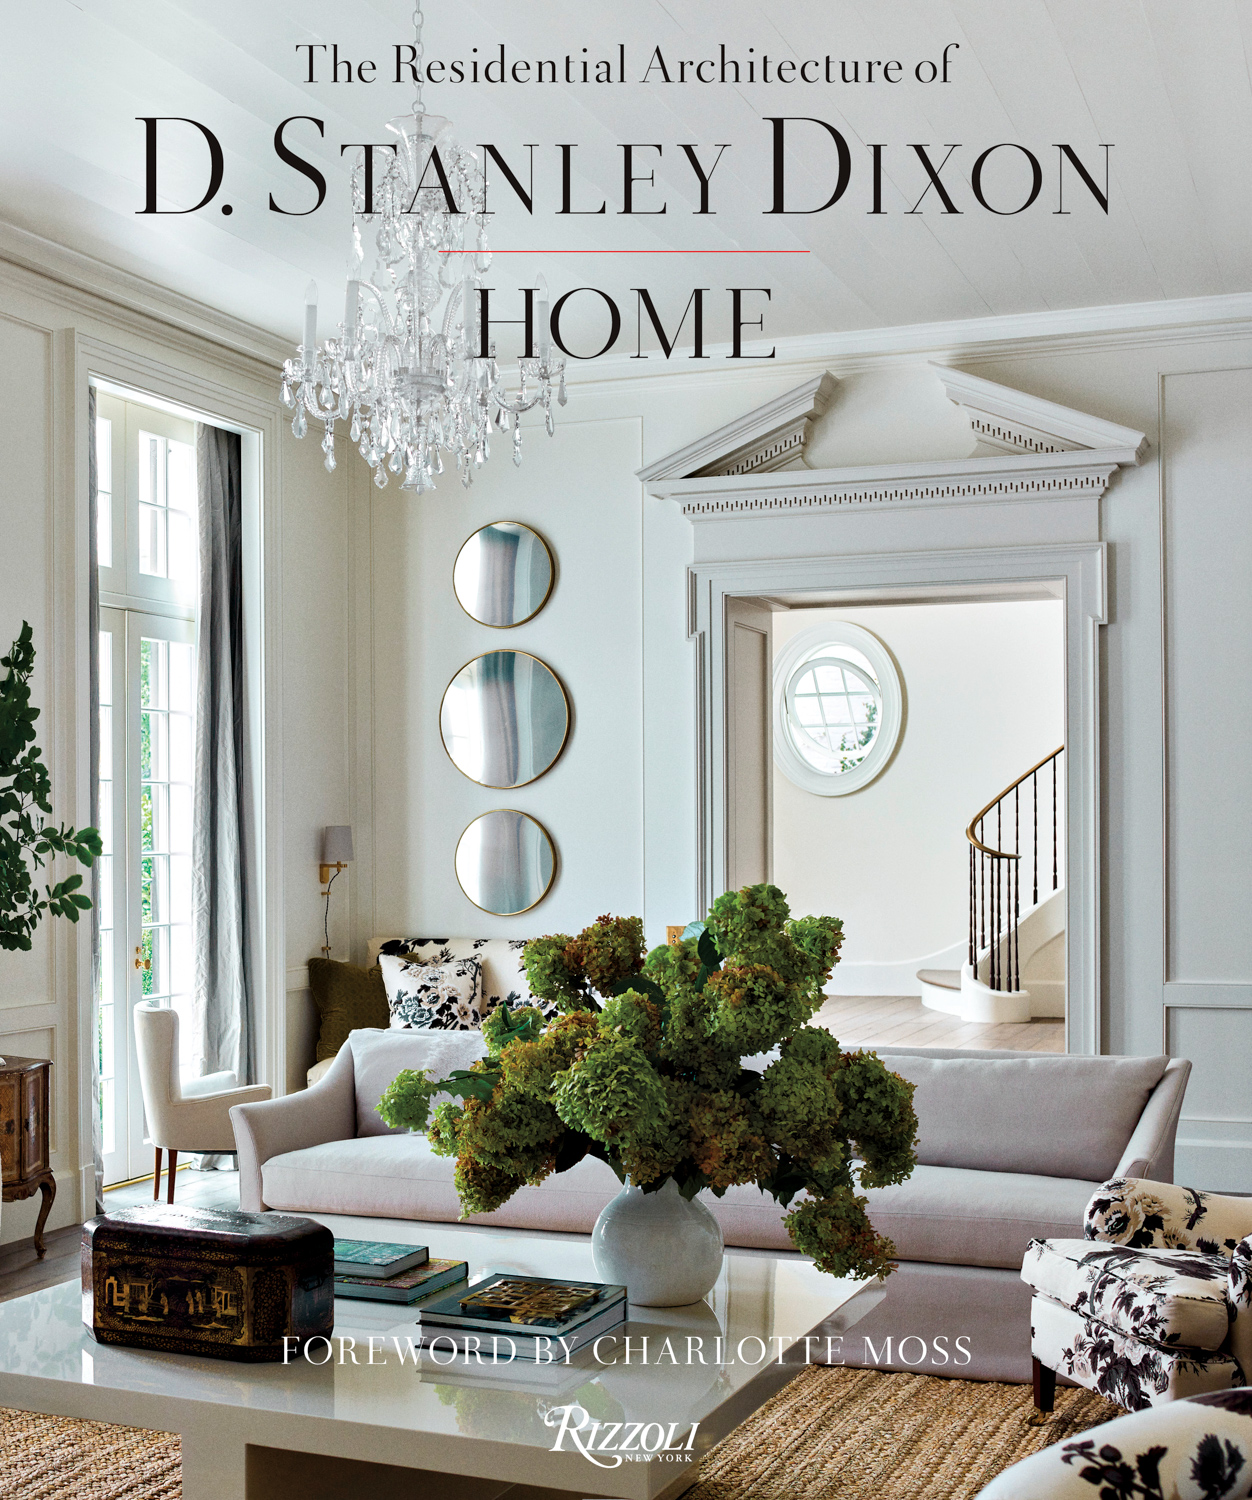 Book cover featuring a white living room with glass chandelier by Stan Dixon